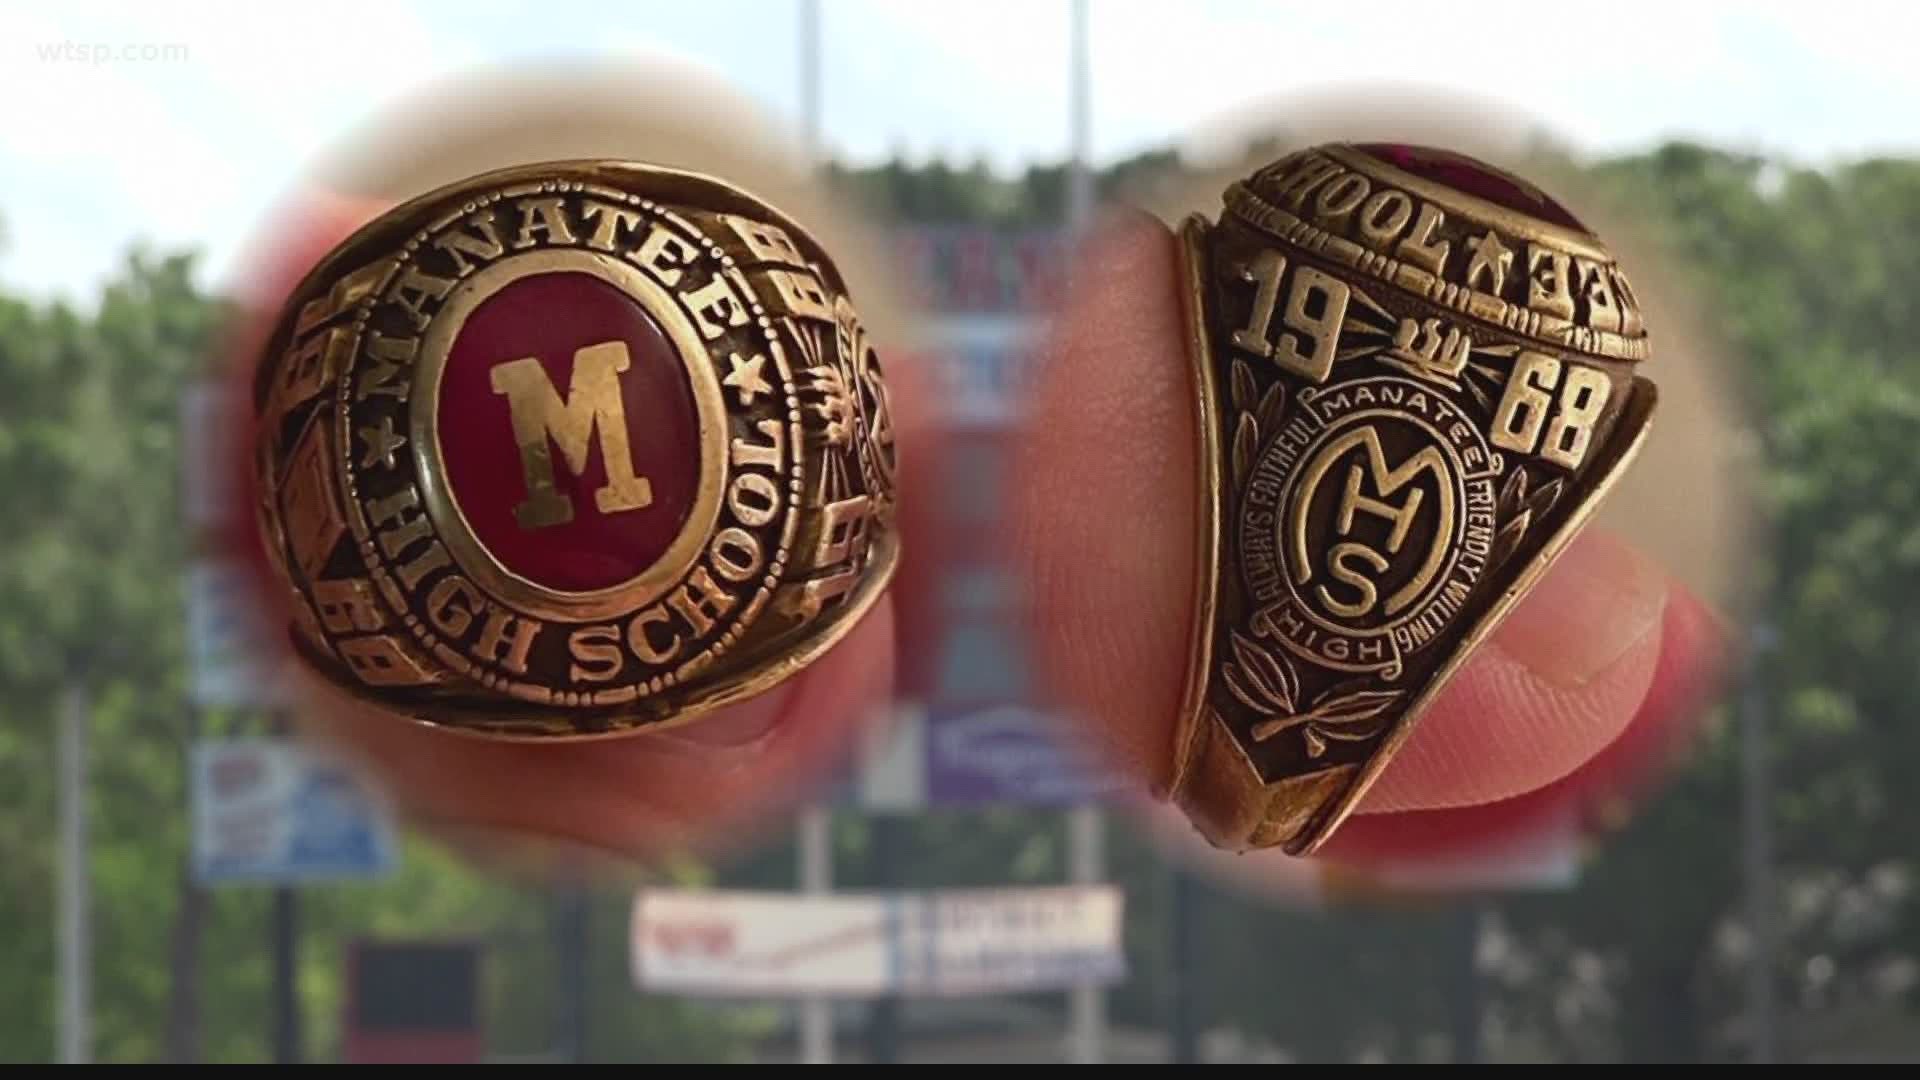 Allan Ackles' was reunited with the ring that was taken from his football locker in 1968. It was found by a man who also happened to lose his class ring in 1965.